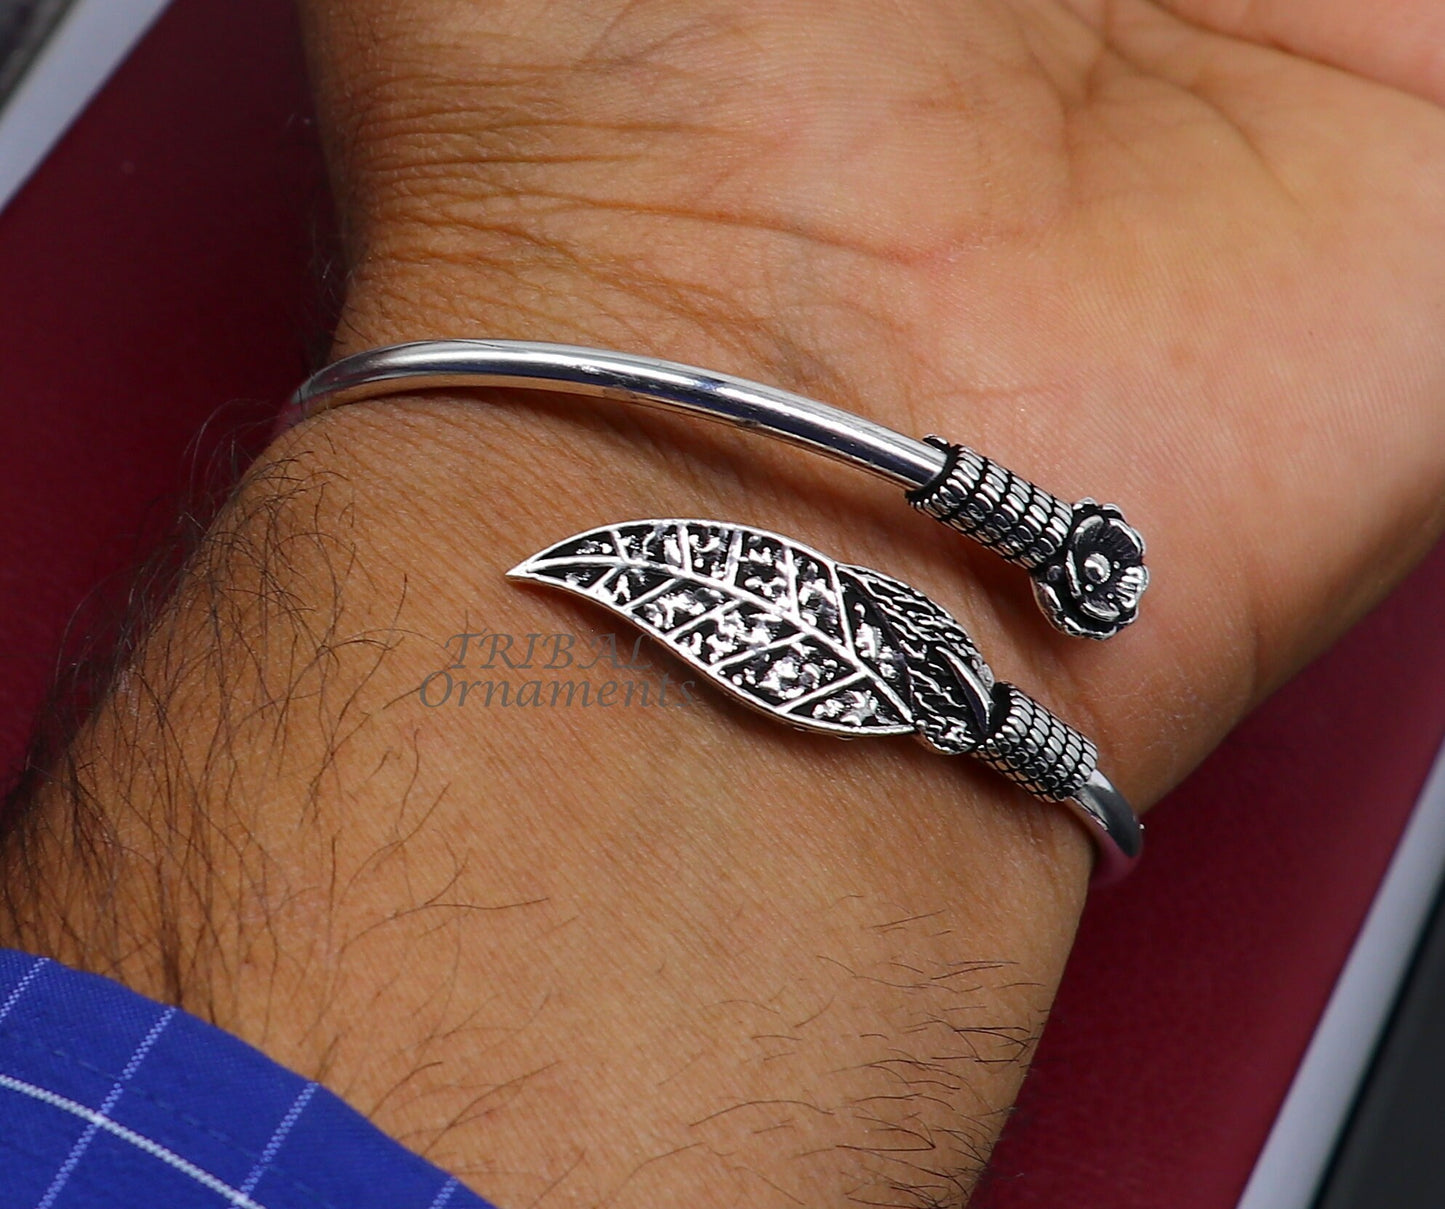 Flower and tree leaf style 925 sterling silver exclusive design handmade bangle bracelet kada for girl's women's silver jewelry nsk635 - TRIBAL ORNAMENTS